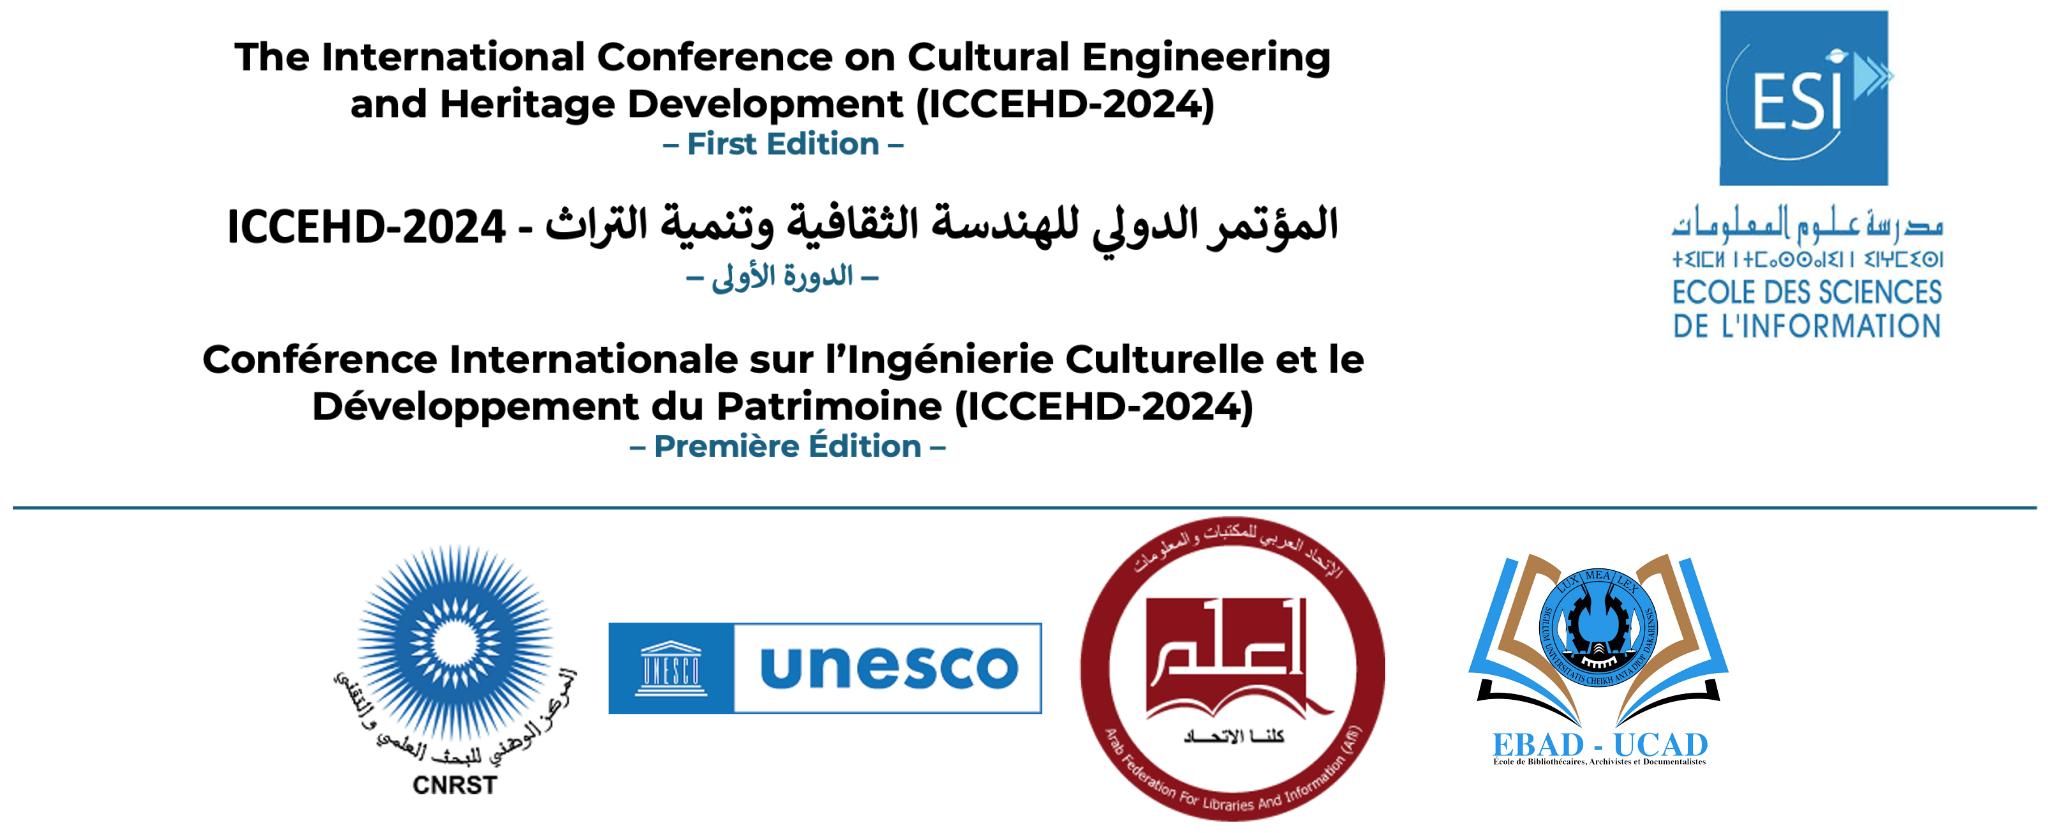 The International Conference on Cultural Engineering and Heritage Development –  First Edition (ICCEHD-2024)